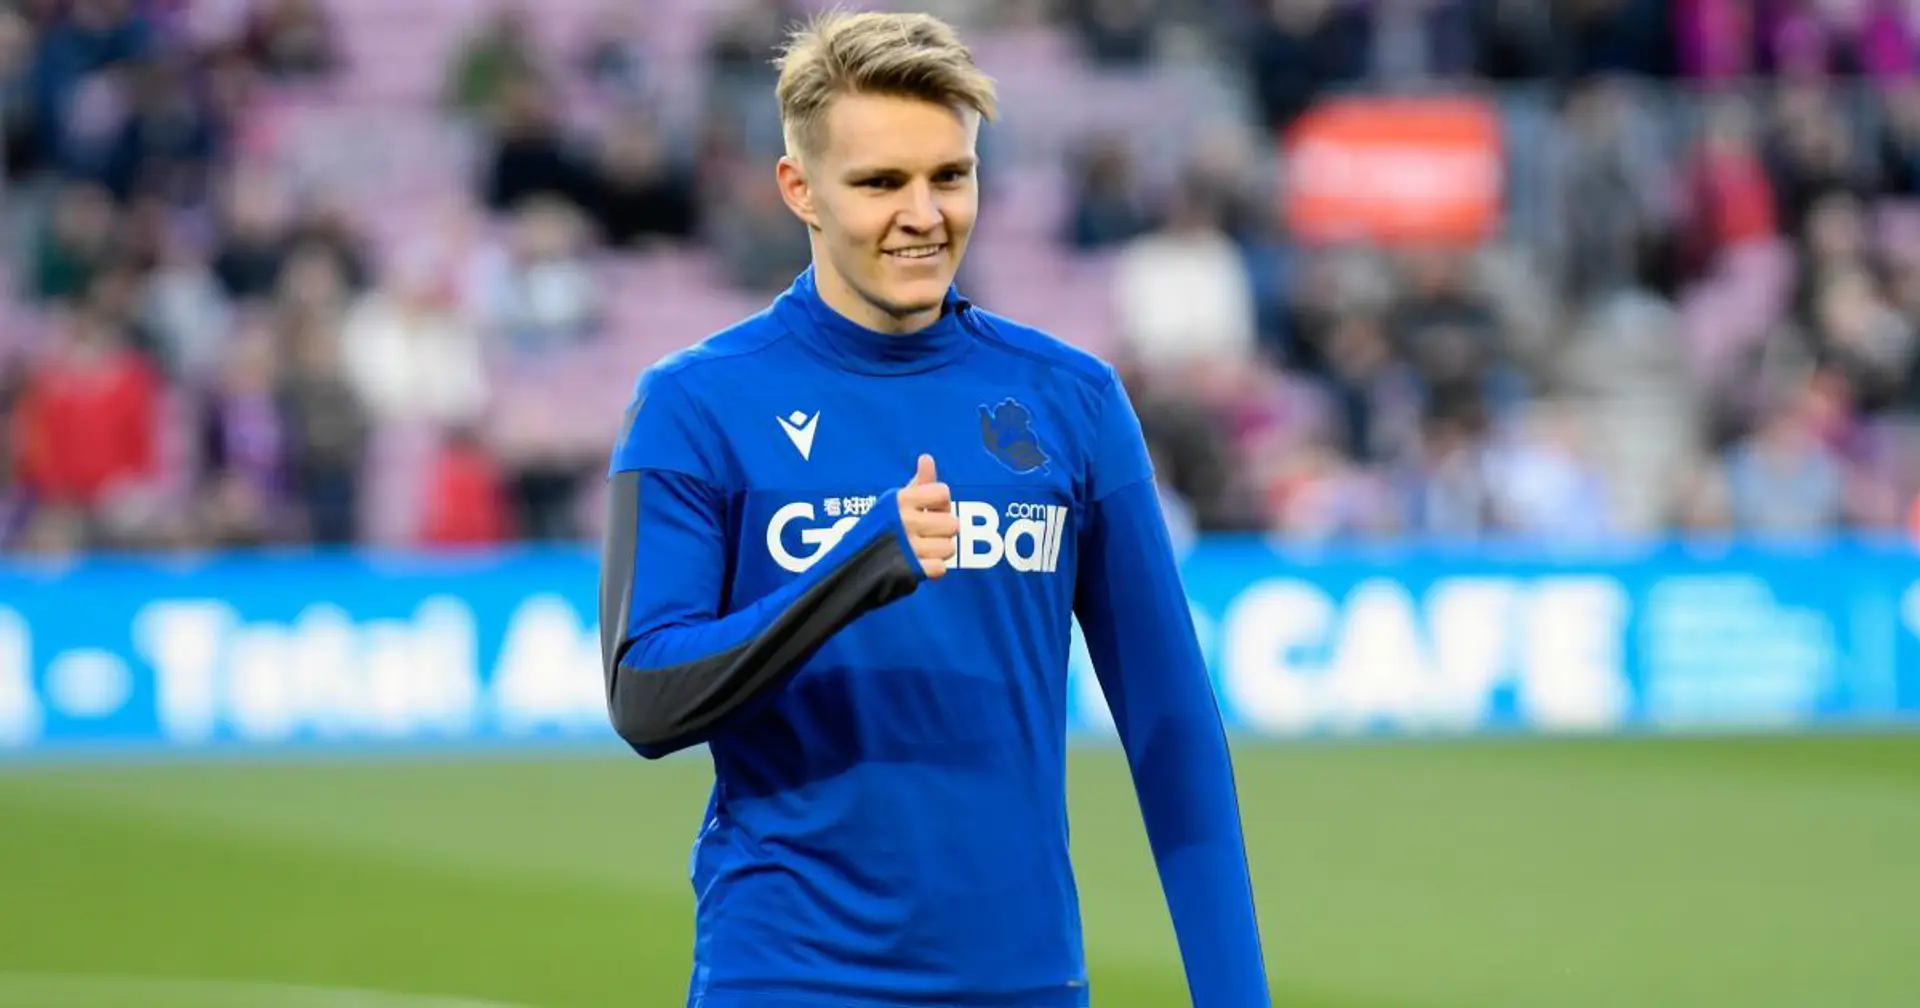 Official: Odegaard recalled from international duty with Norway